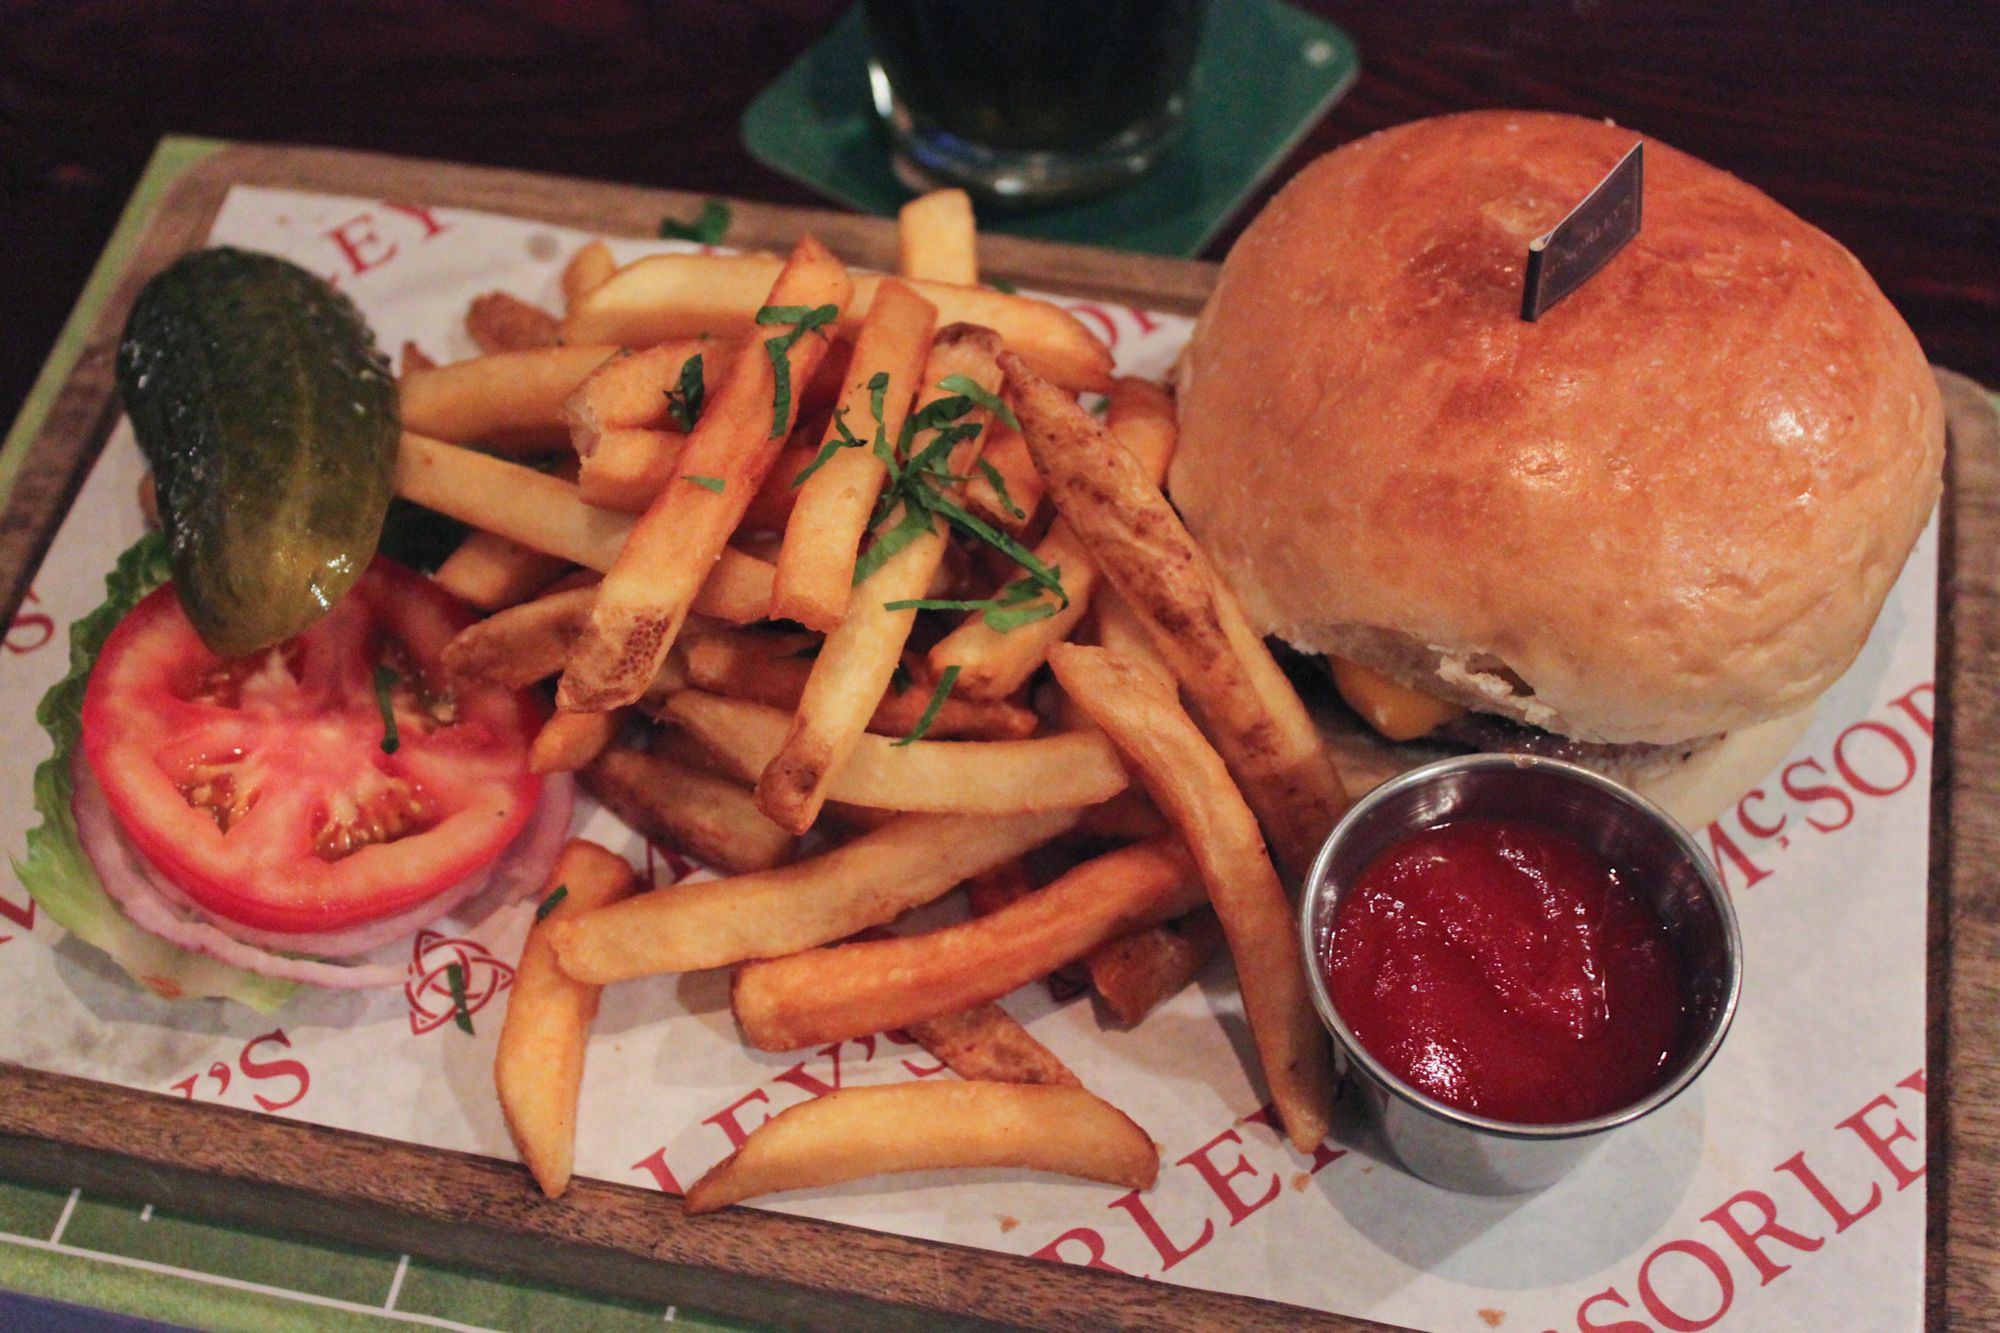 mcsorleys ale house burger where to get the best burgers in macau lifestyle